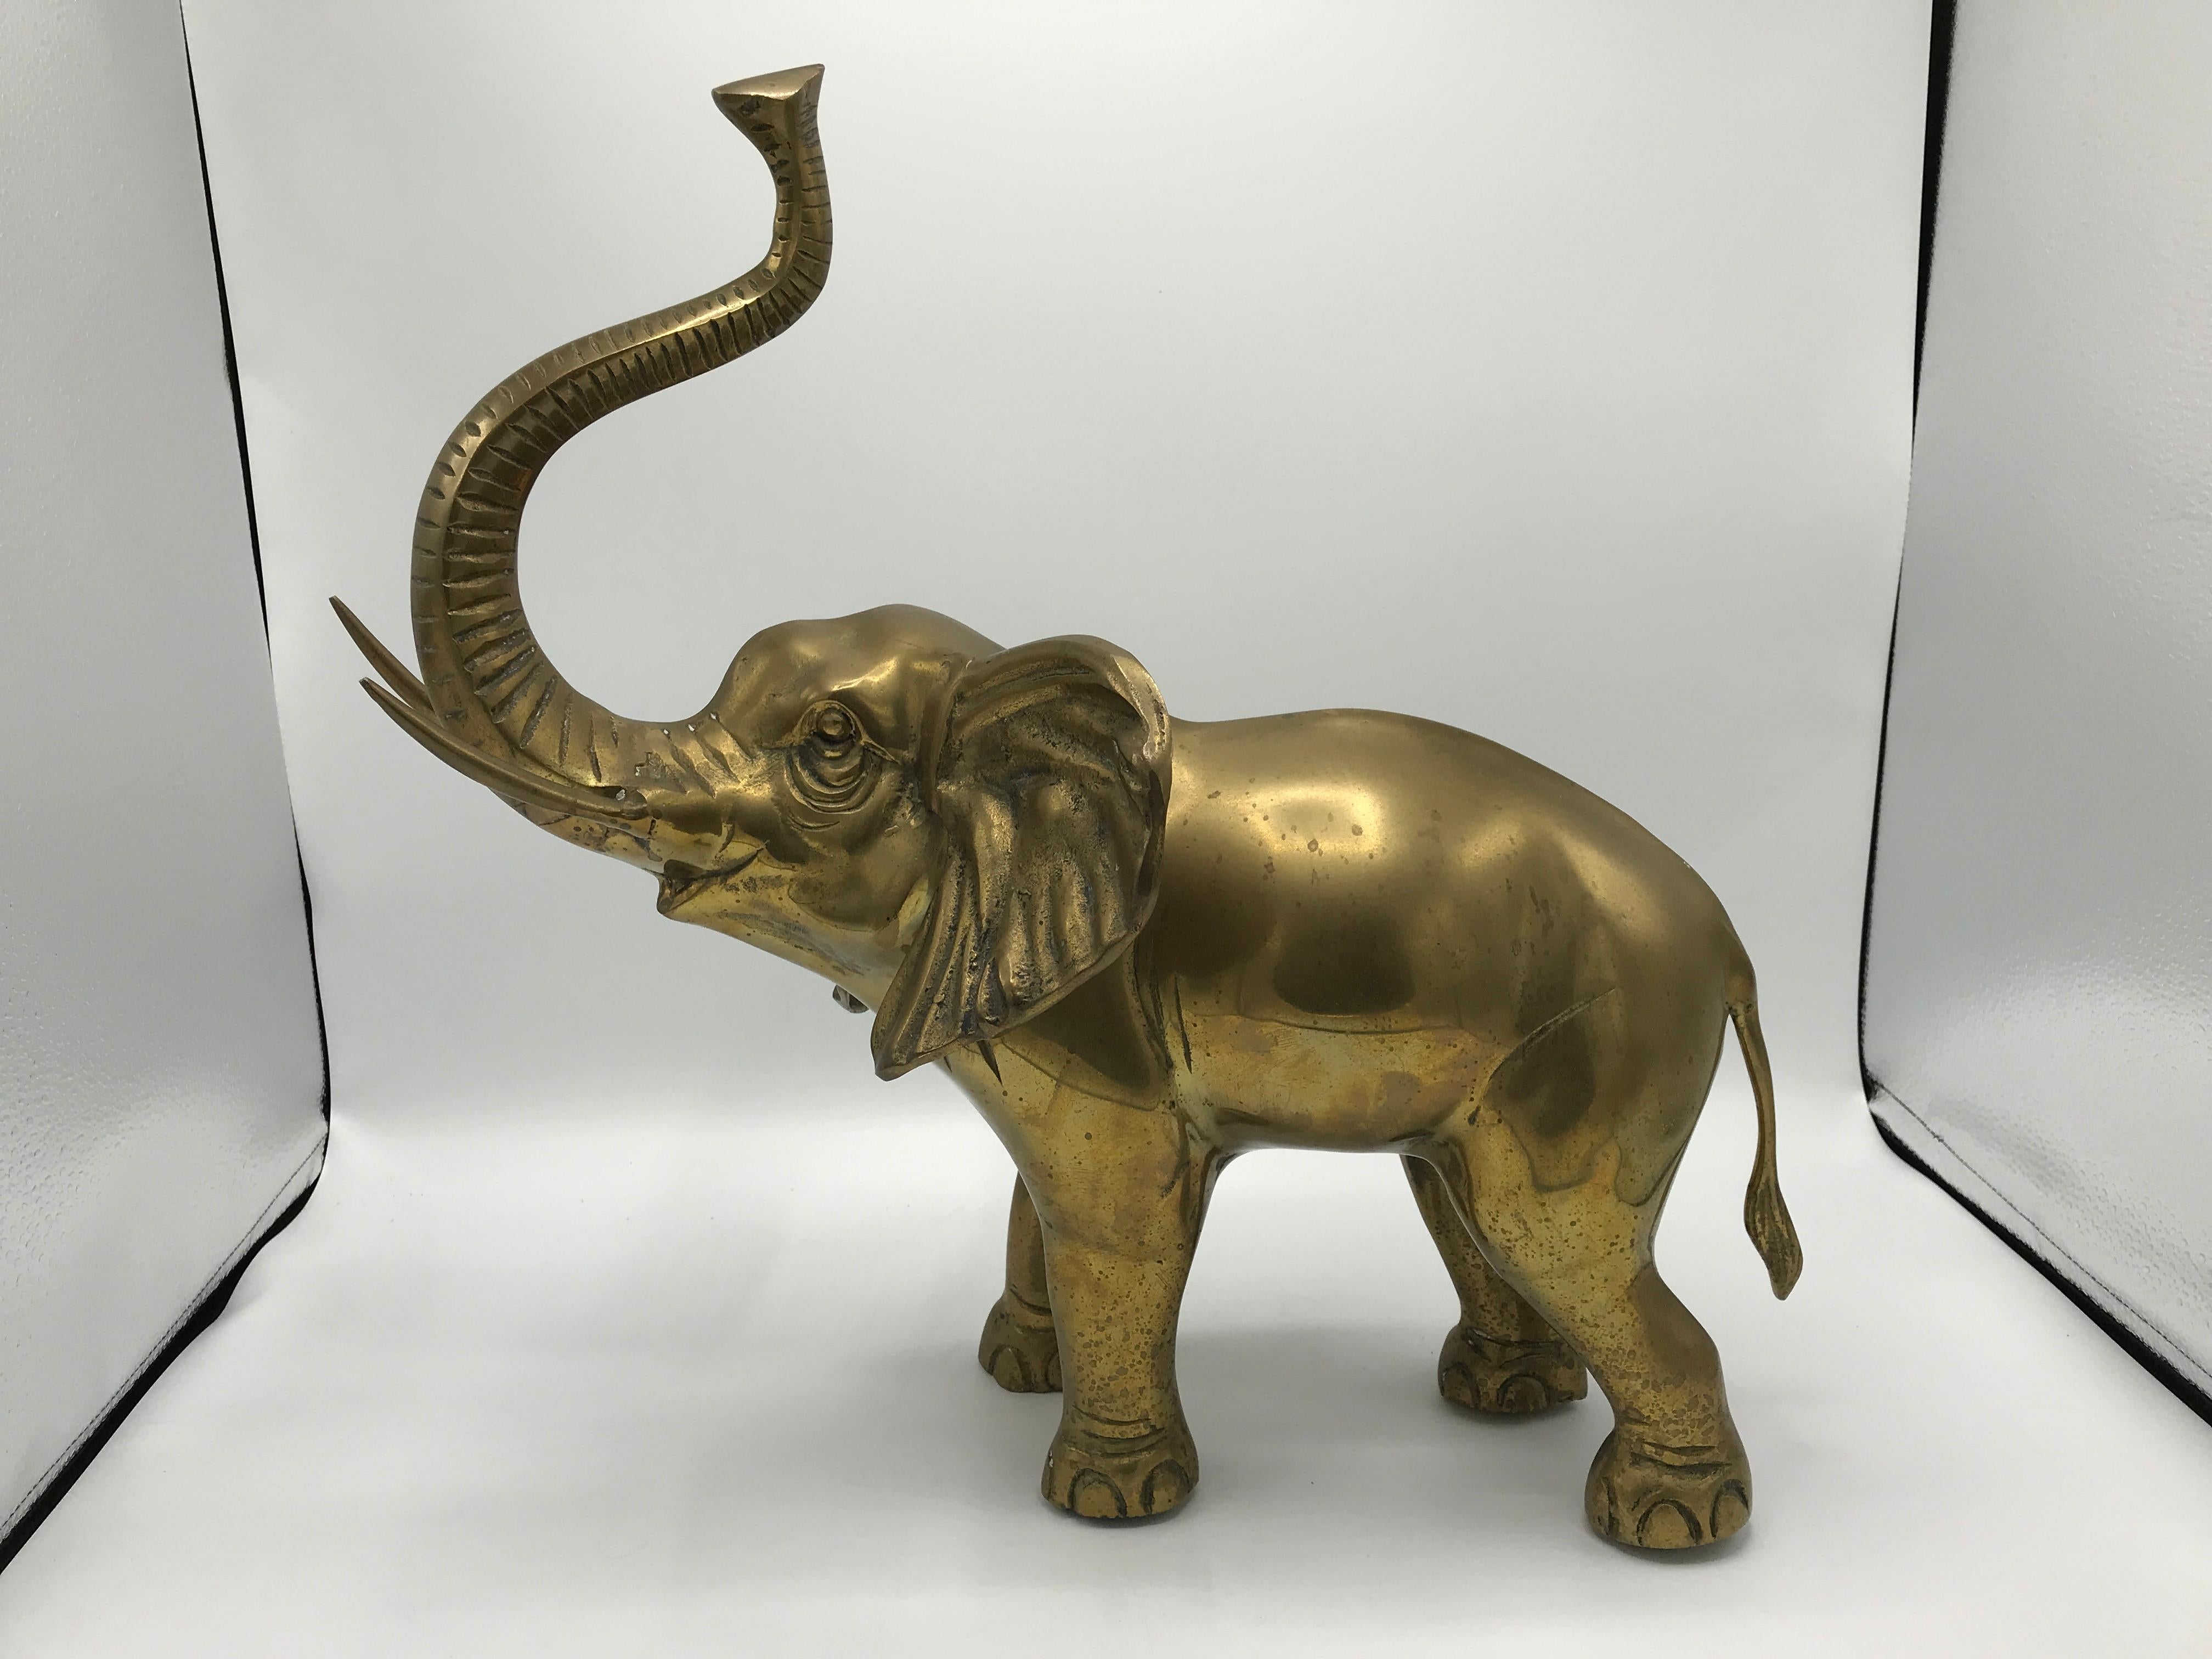 Offered is a beautiful, large, 1970s brass elephant sculpture. This heavily detailed piece is perfect for any brass collector! Heavy, weighing 8.5lbs.